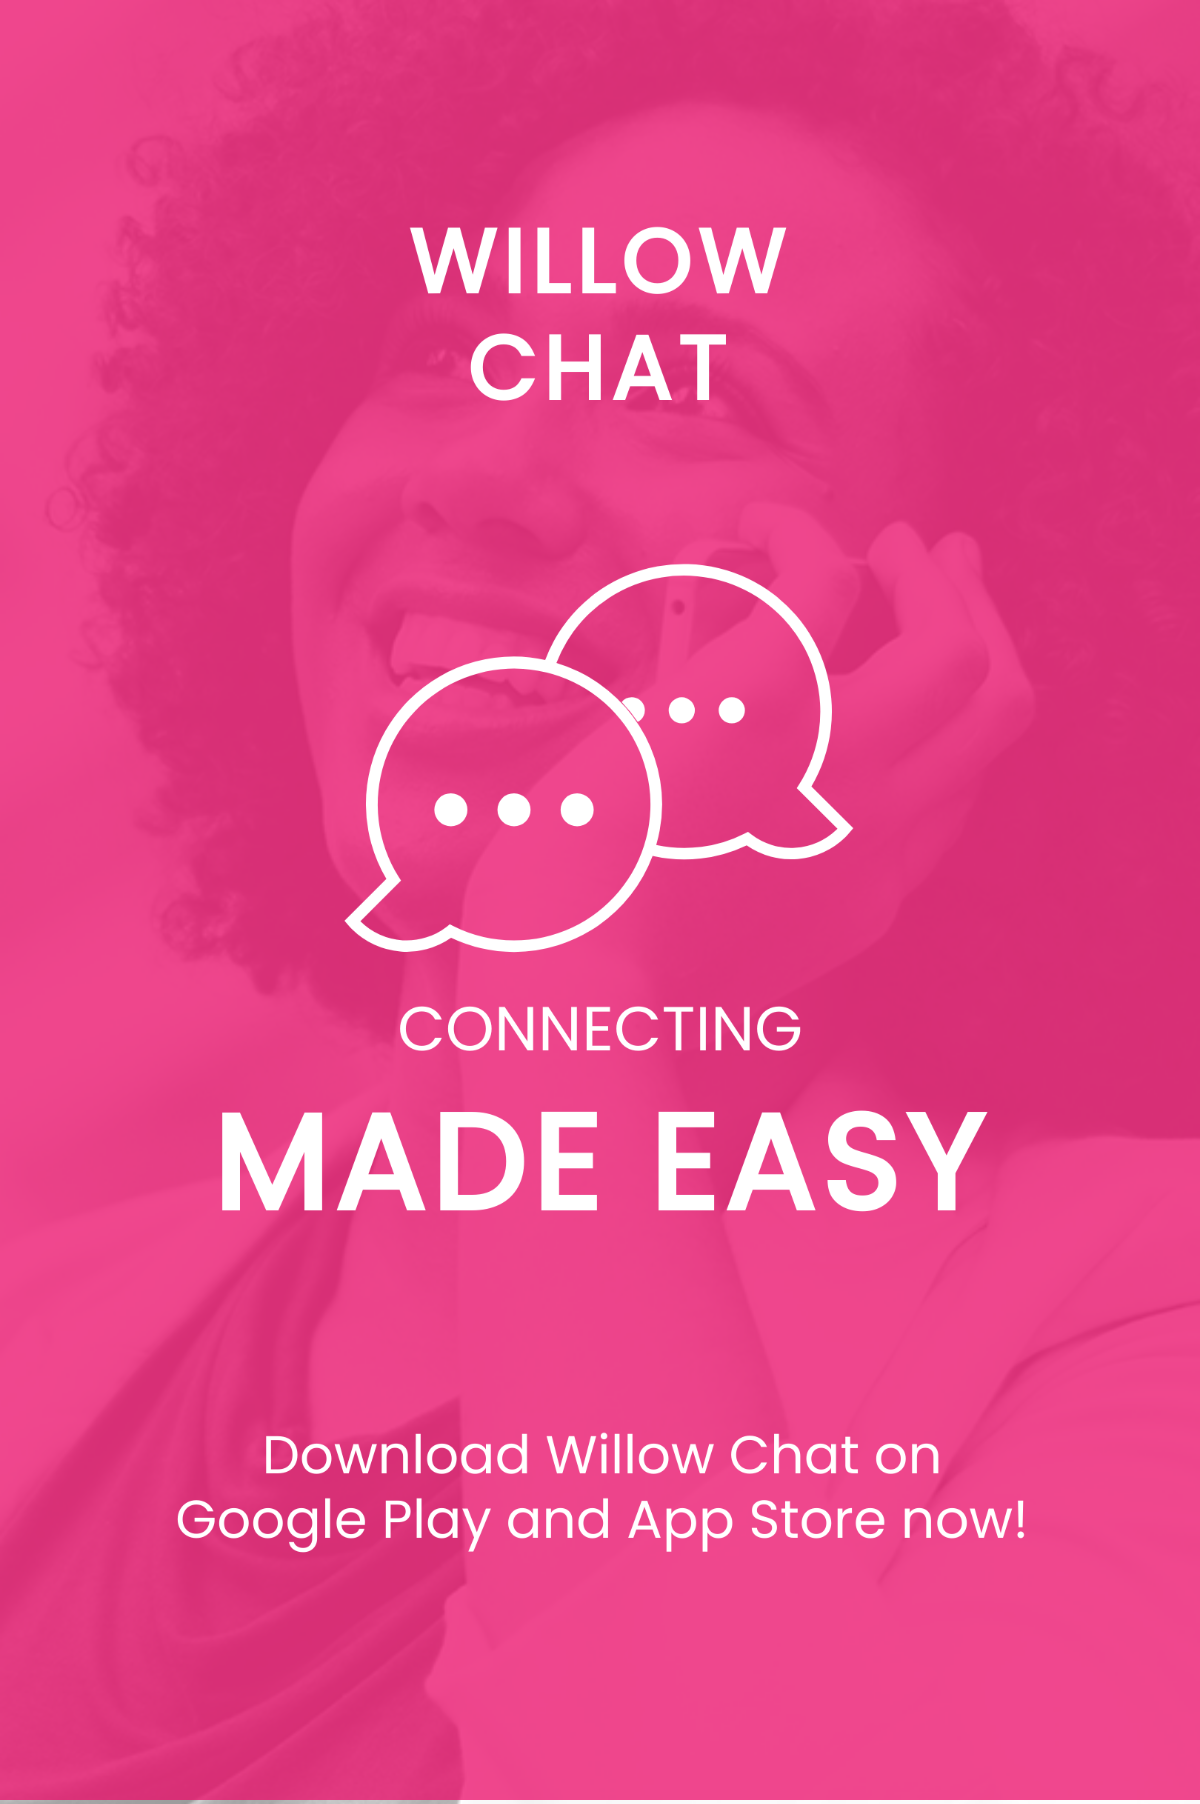 Chat App Promotion Tumblr Post Template